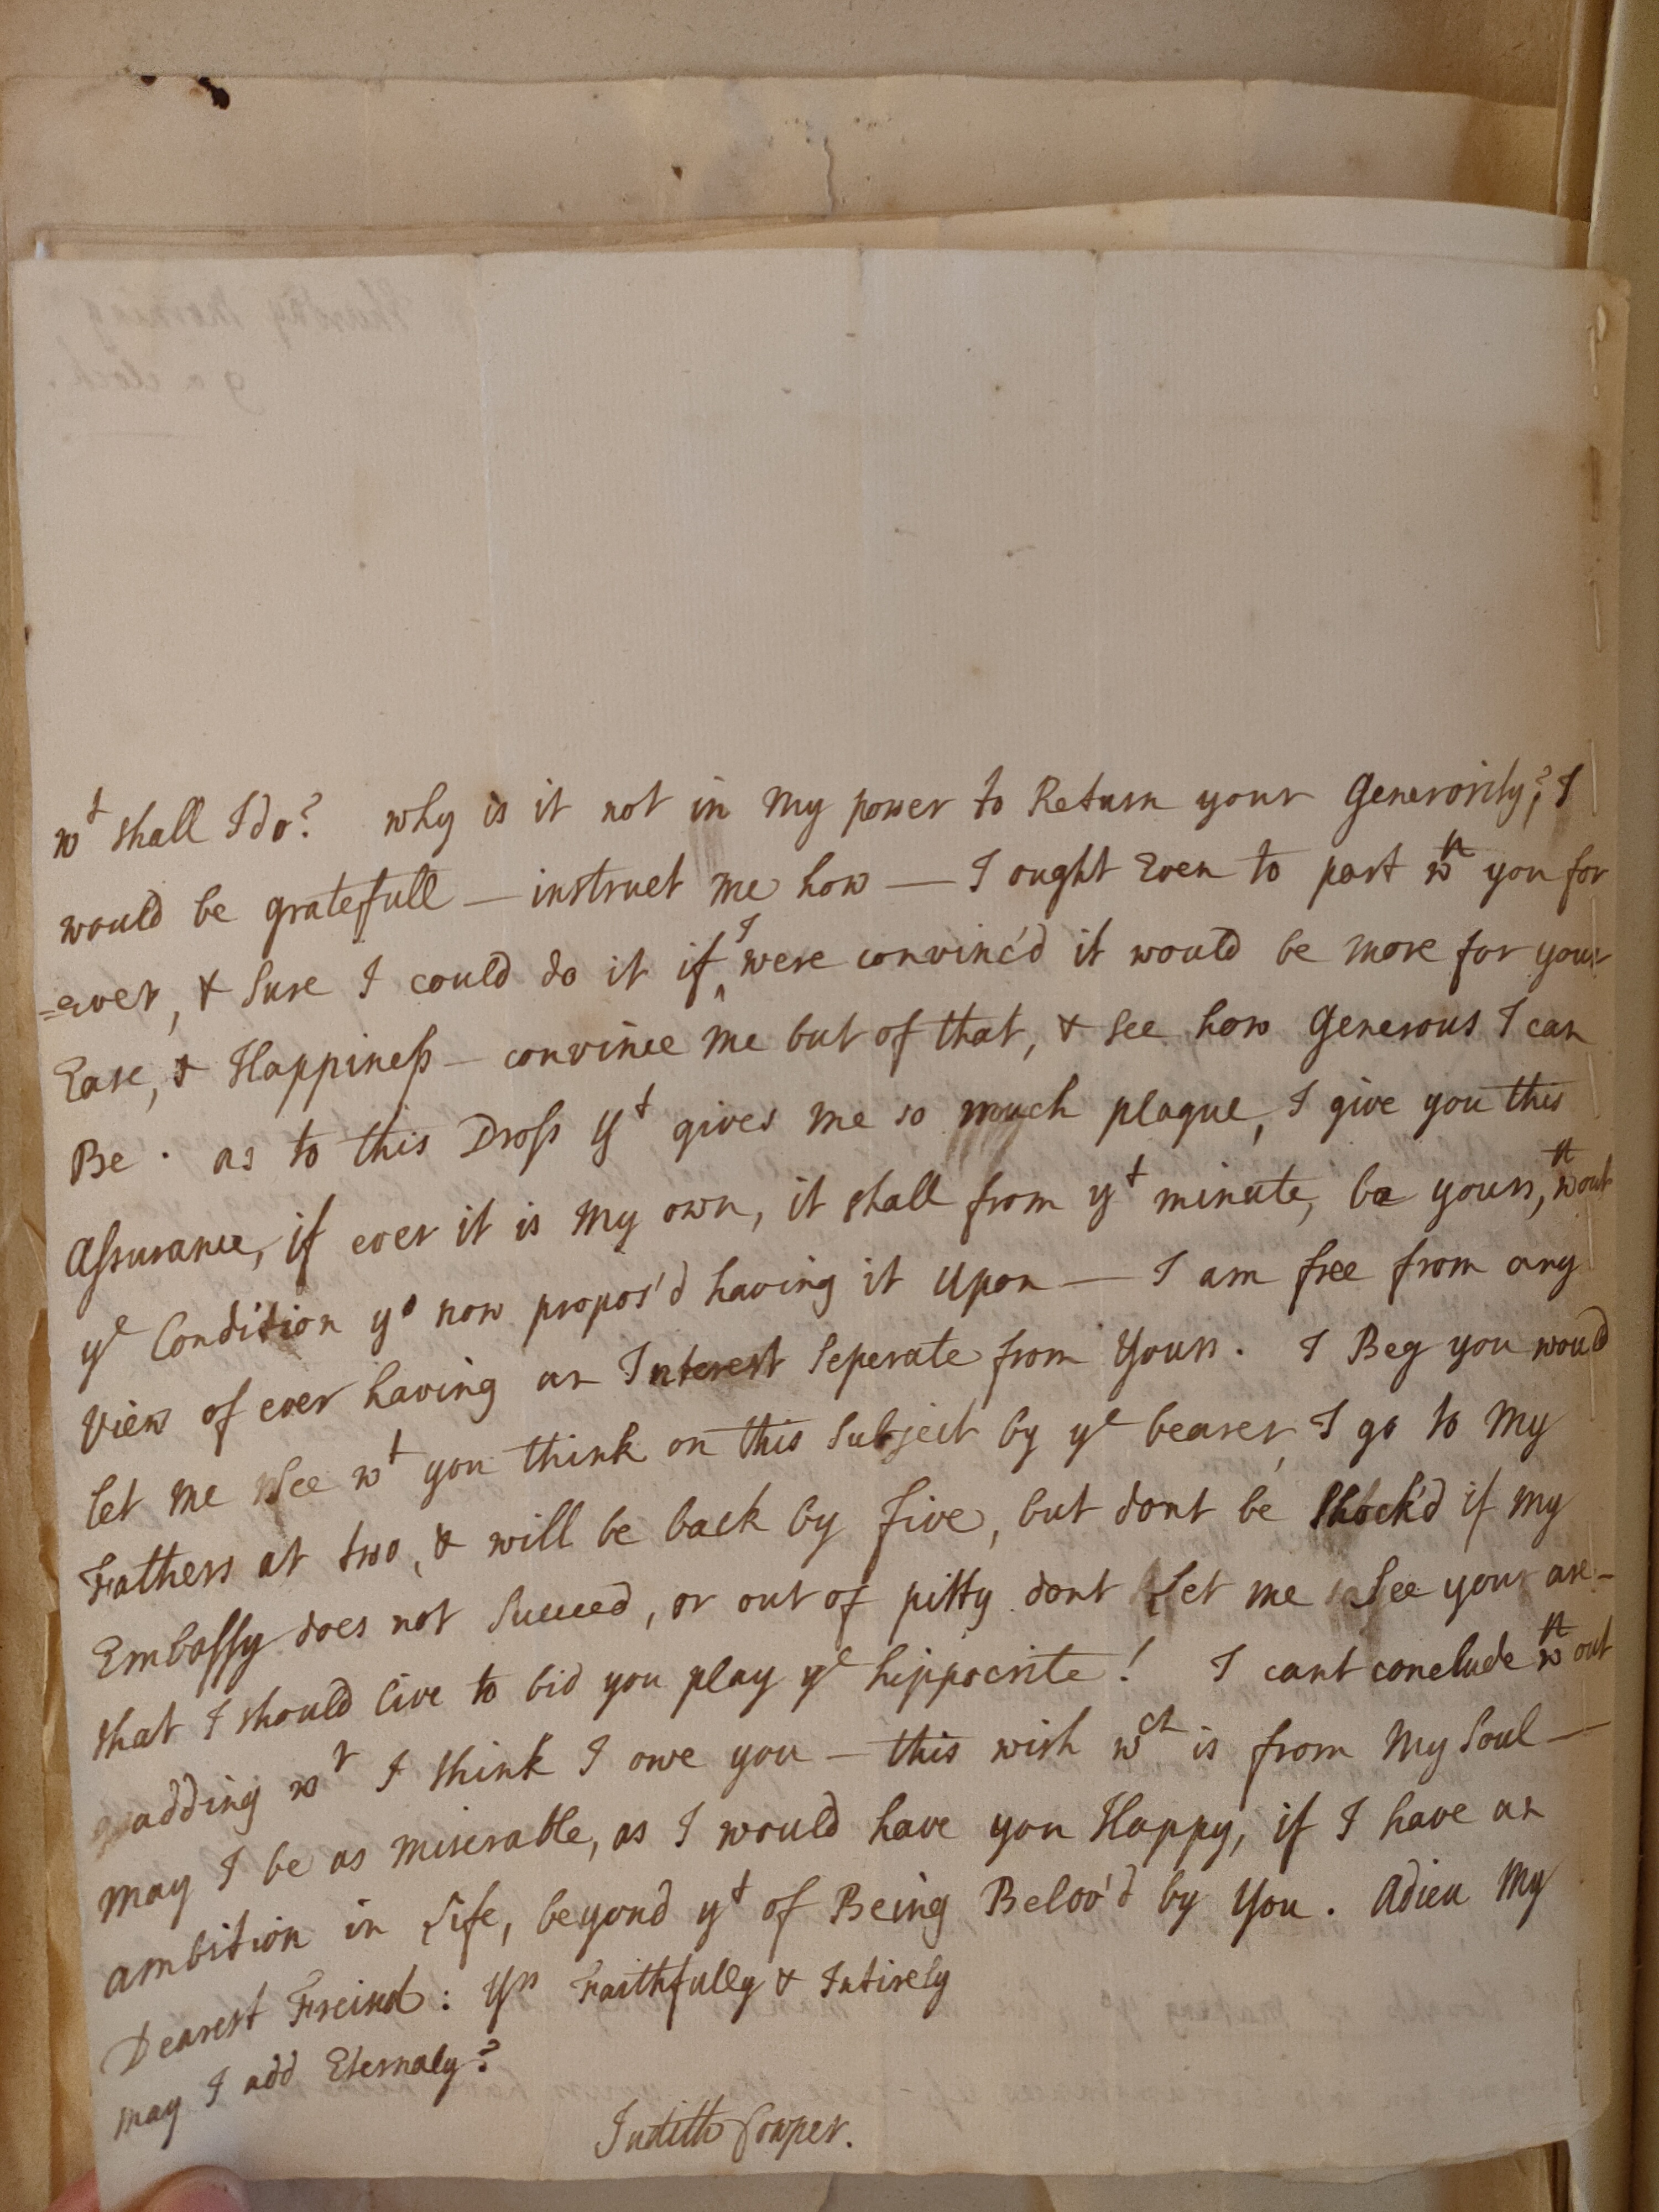 Image #2 of letter: Judith Cowper to Martin Madan